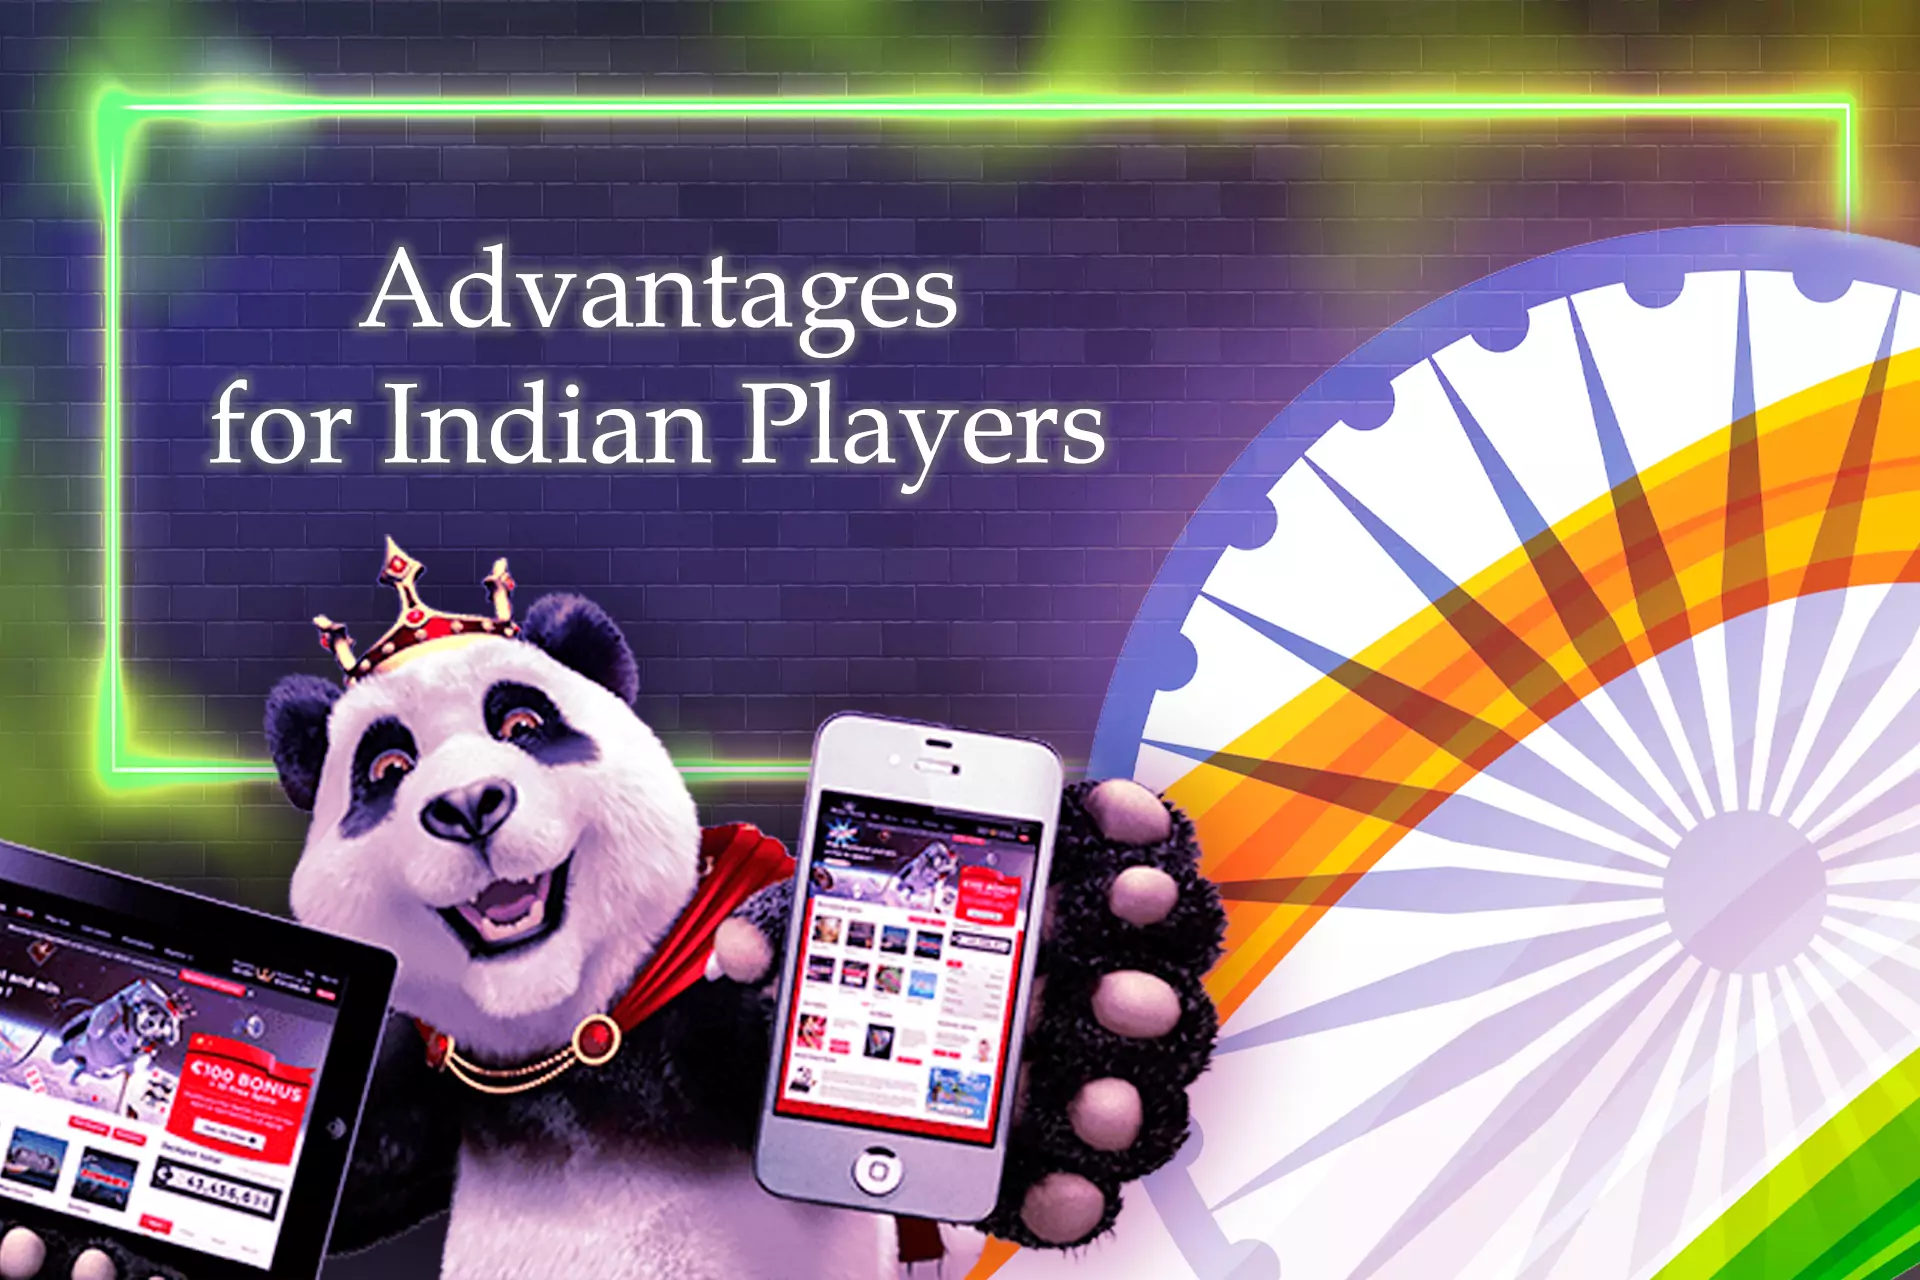 For Indian users, there are lots of traditional Indian games in the casino.